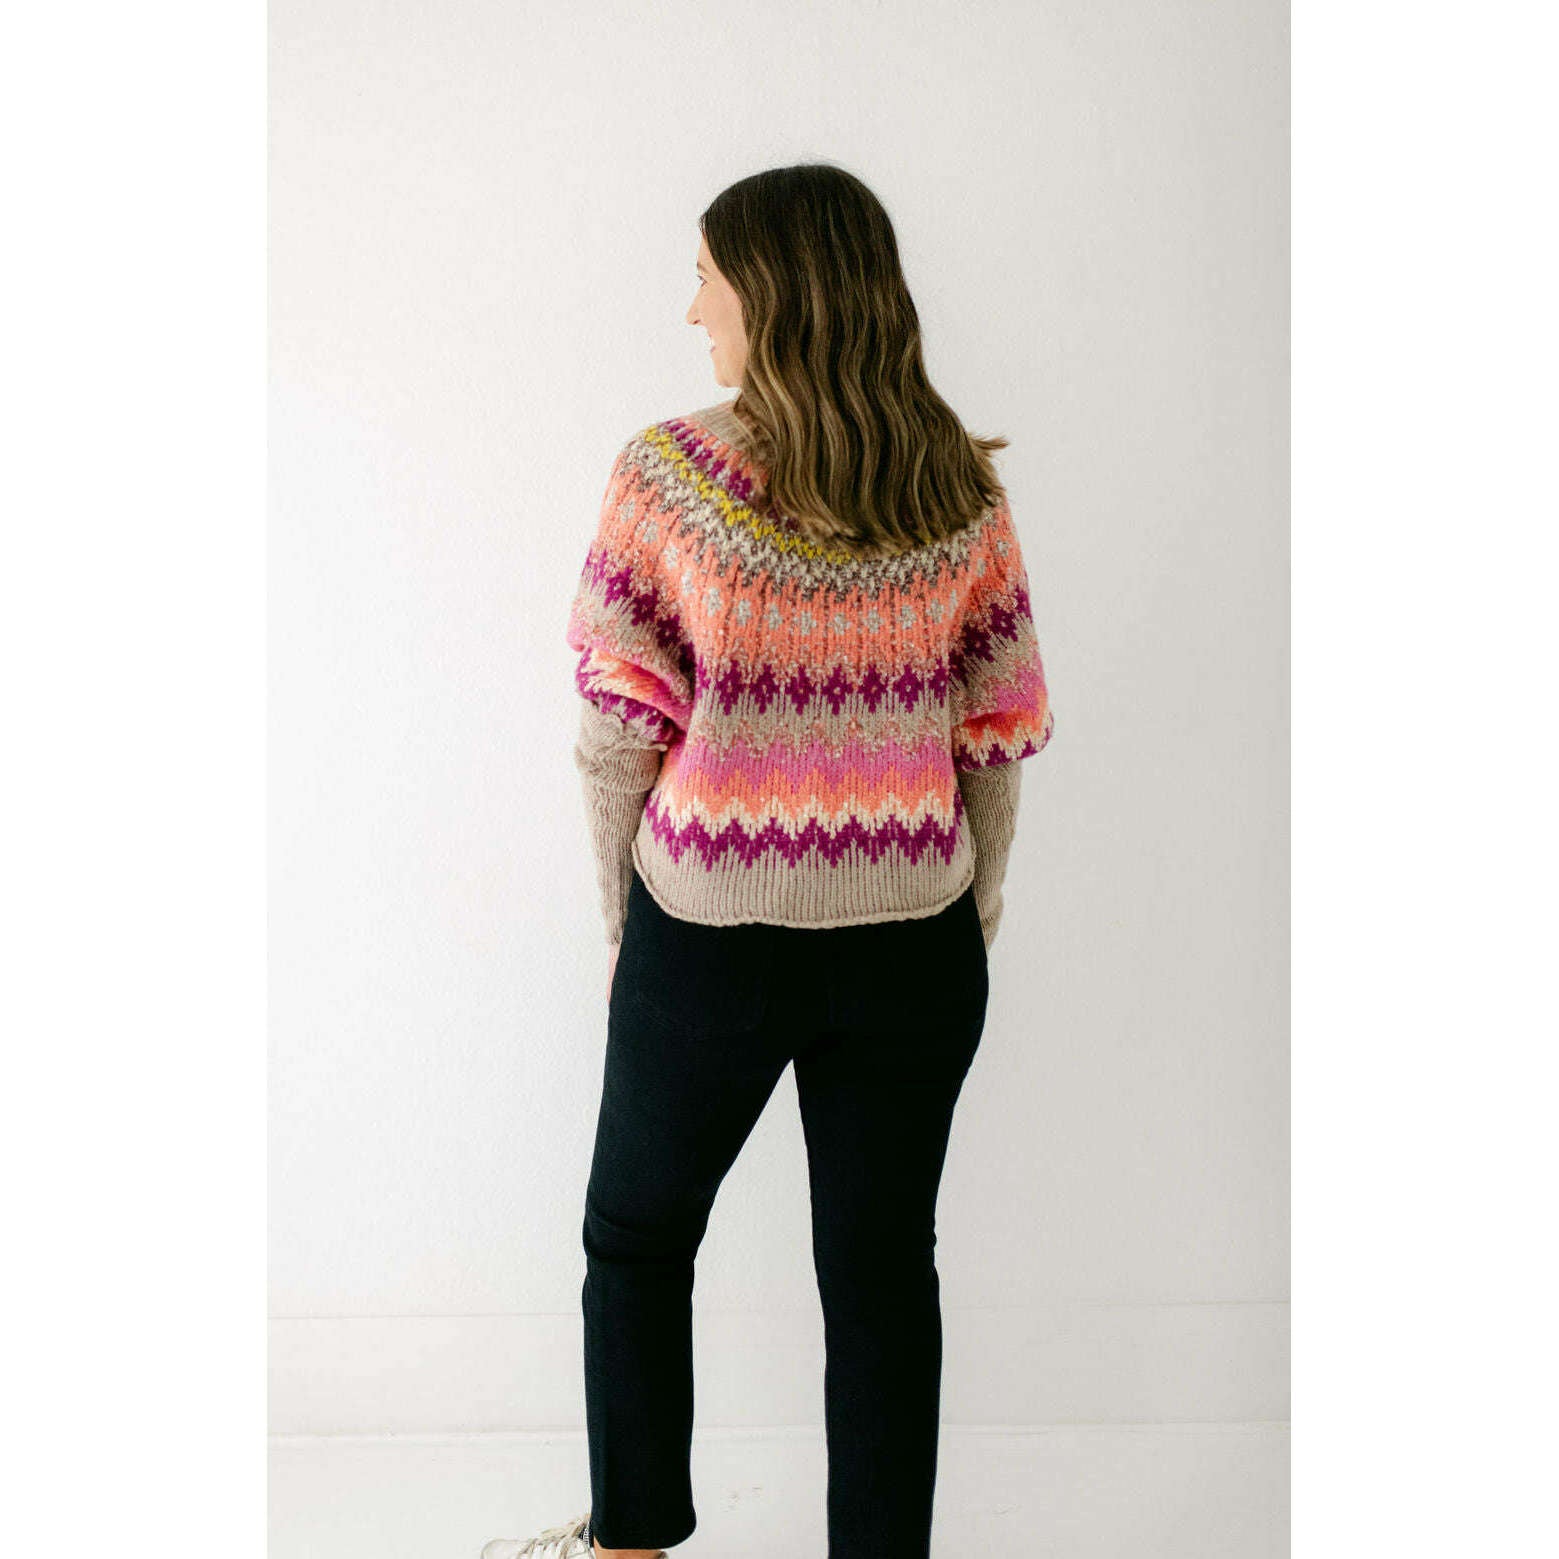 8.28 Boutique:Free People,Free People Home for the Holidays Sweater,Sweaters